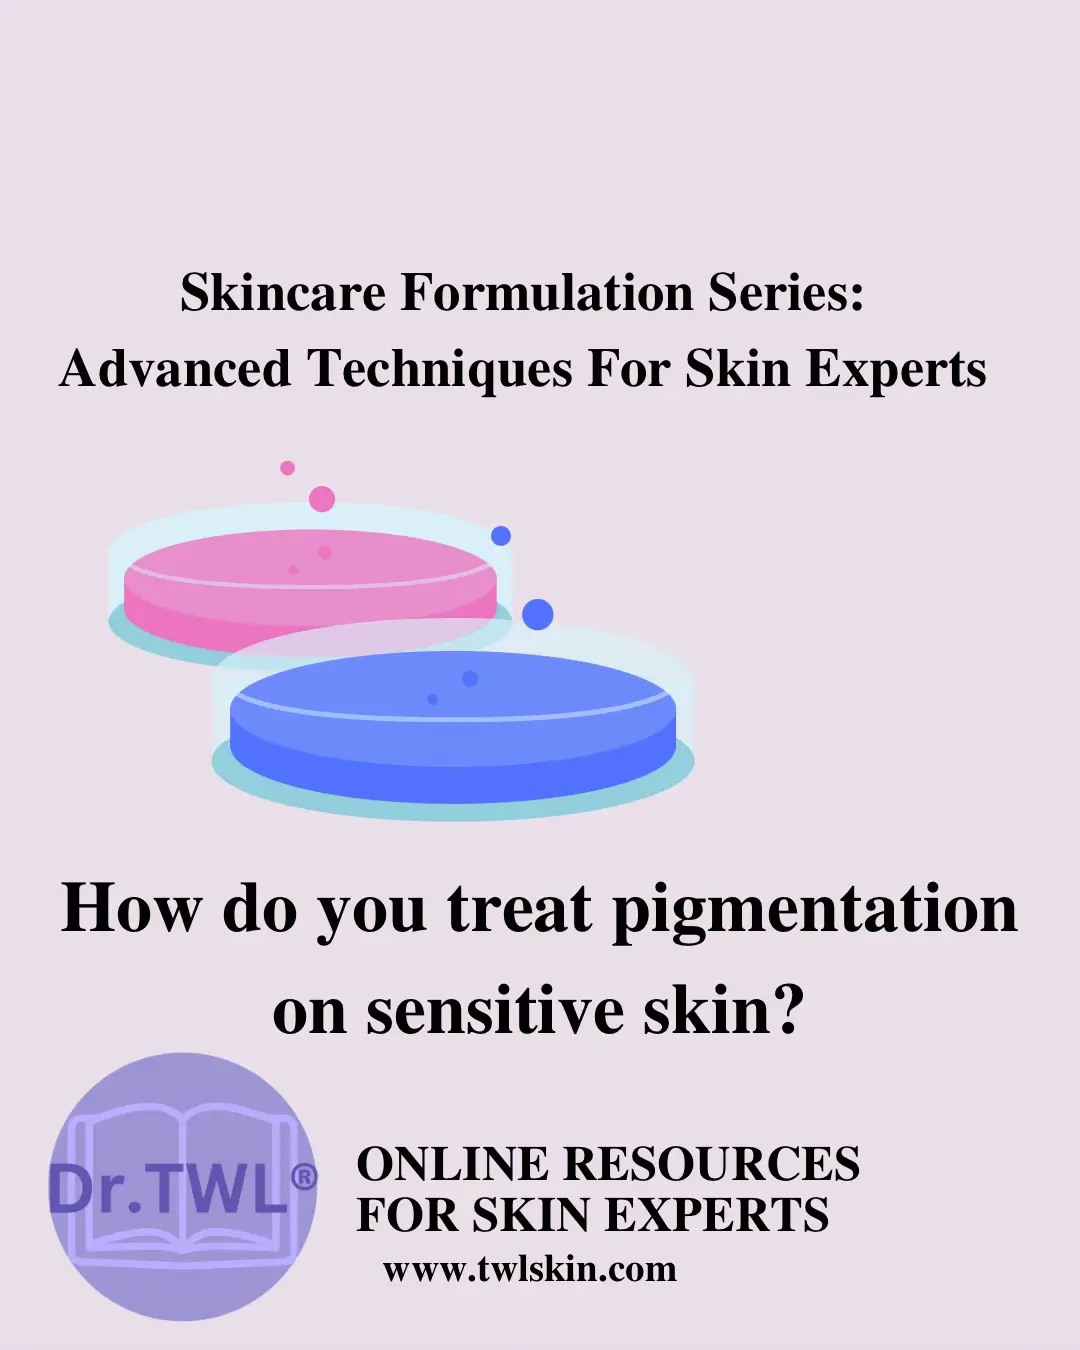 How to treat pigmentation on sensitive skin's images(2)